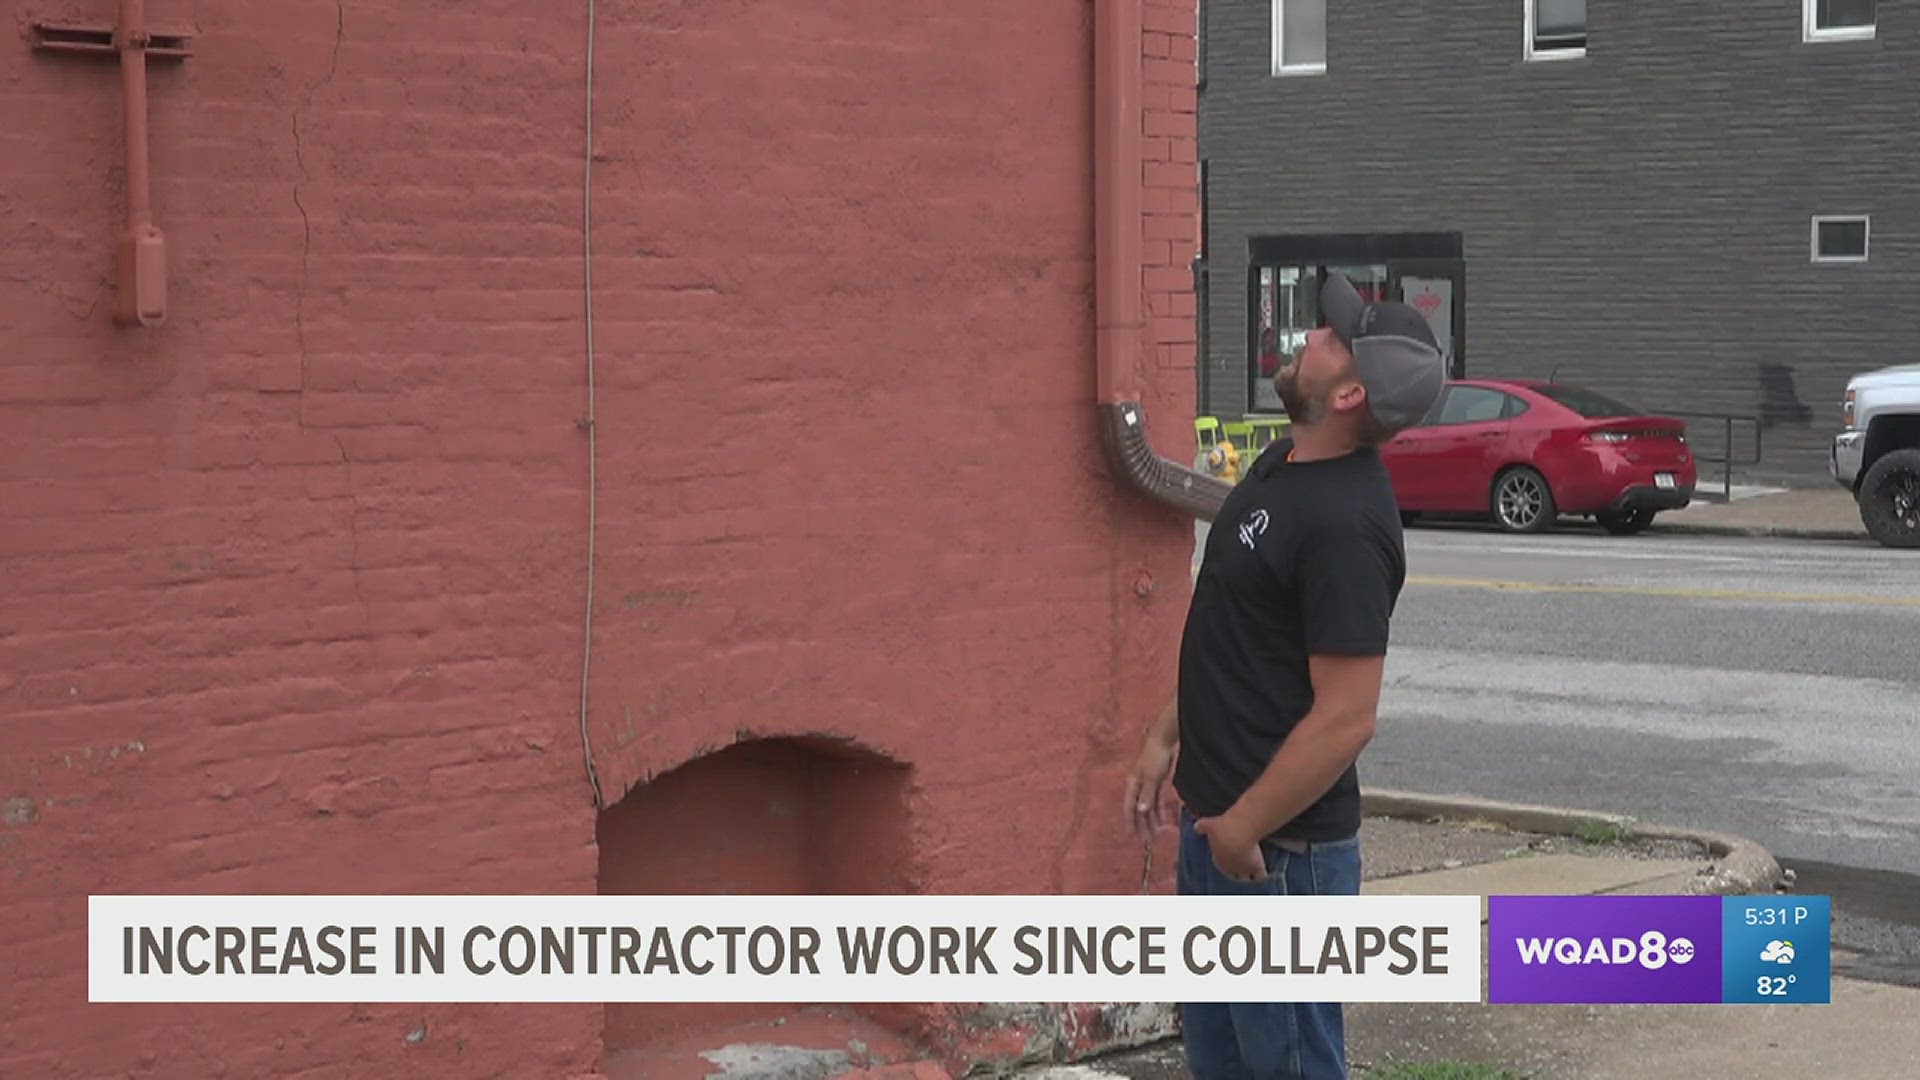 R.A. Masonry has gotten over 15 new jobs since the building collapse.